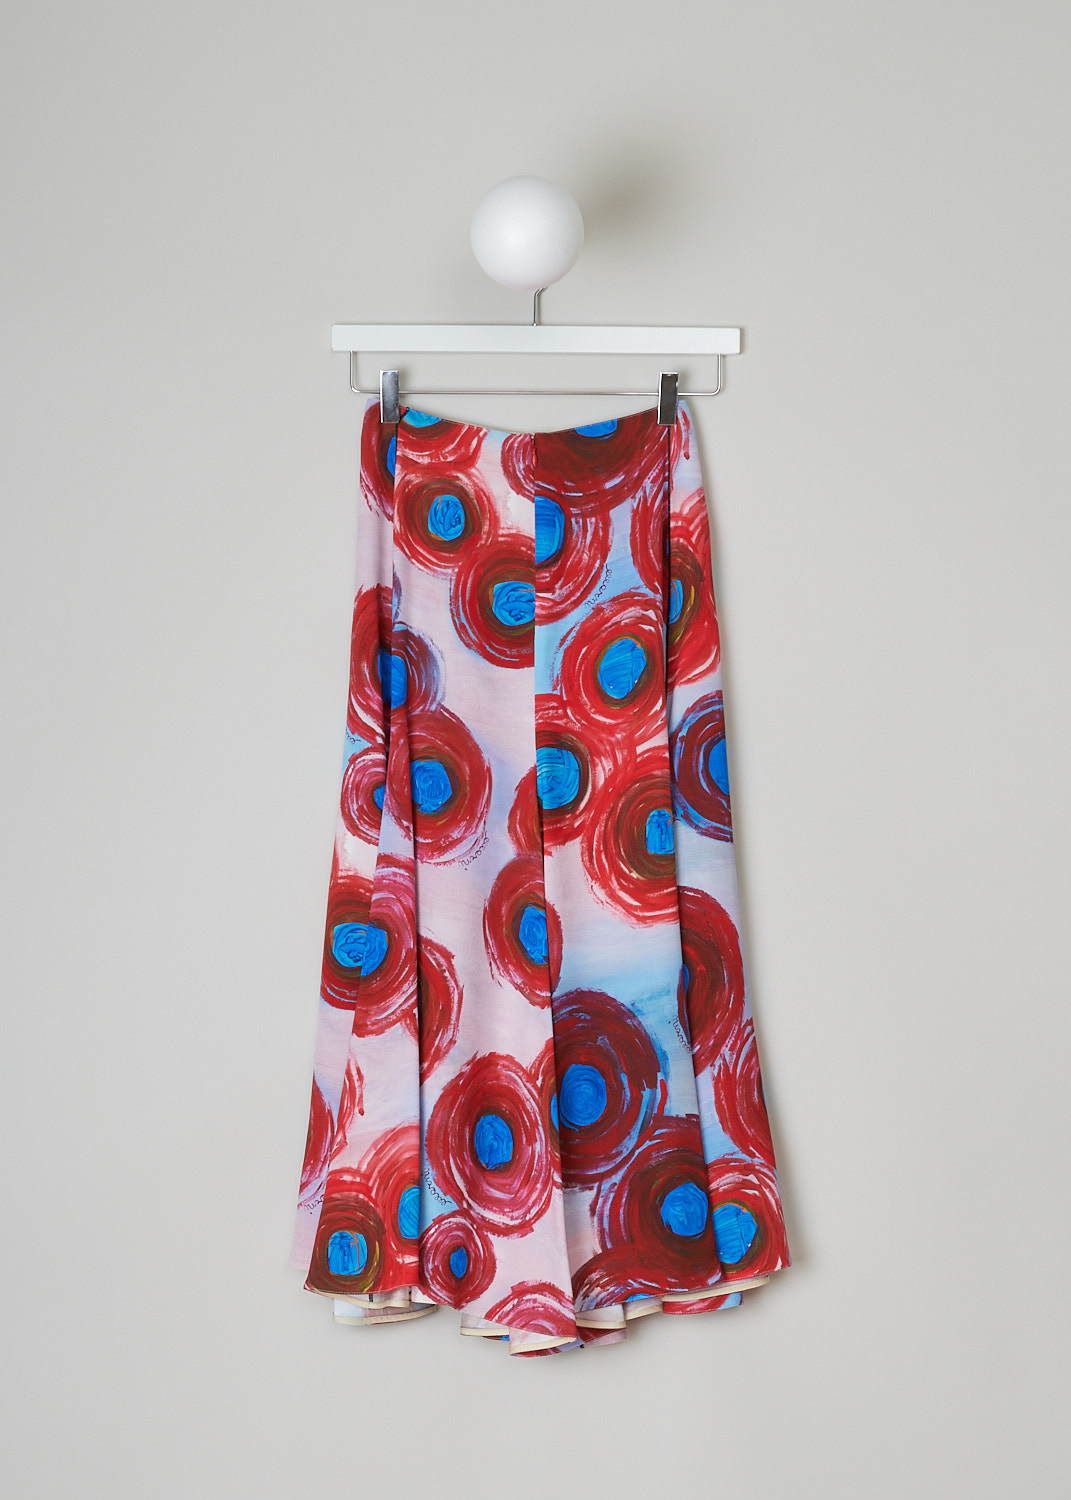 MARNI, BUCHI ROSSI MIDI SKIRT, GOMA0550A0_UTV976_BRR64, Pink, Blue, Print, Back, This high-waisted midi skirt has a pink base color with painterly red and blue dots throughout. In the back, a hook-and eye and concealed zip functions as the closure. The flared skirt has pleats from the waist down to the asymmetric hem.   
